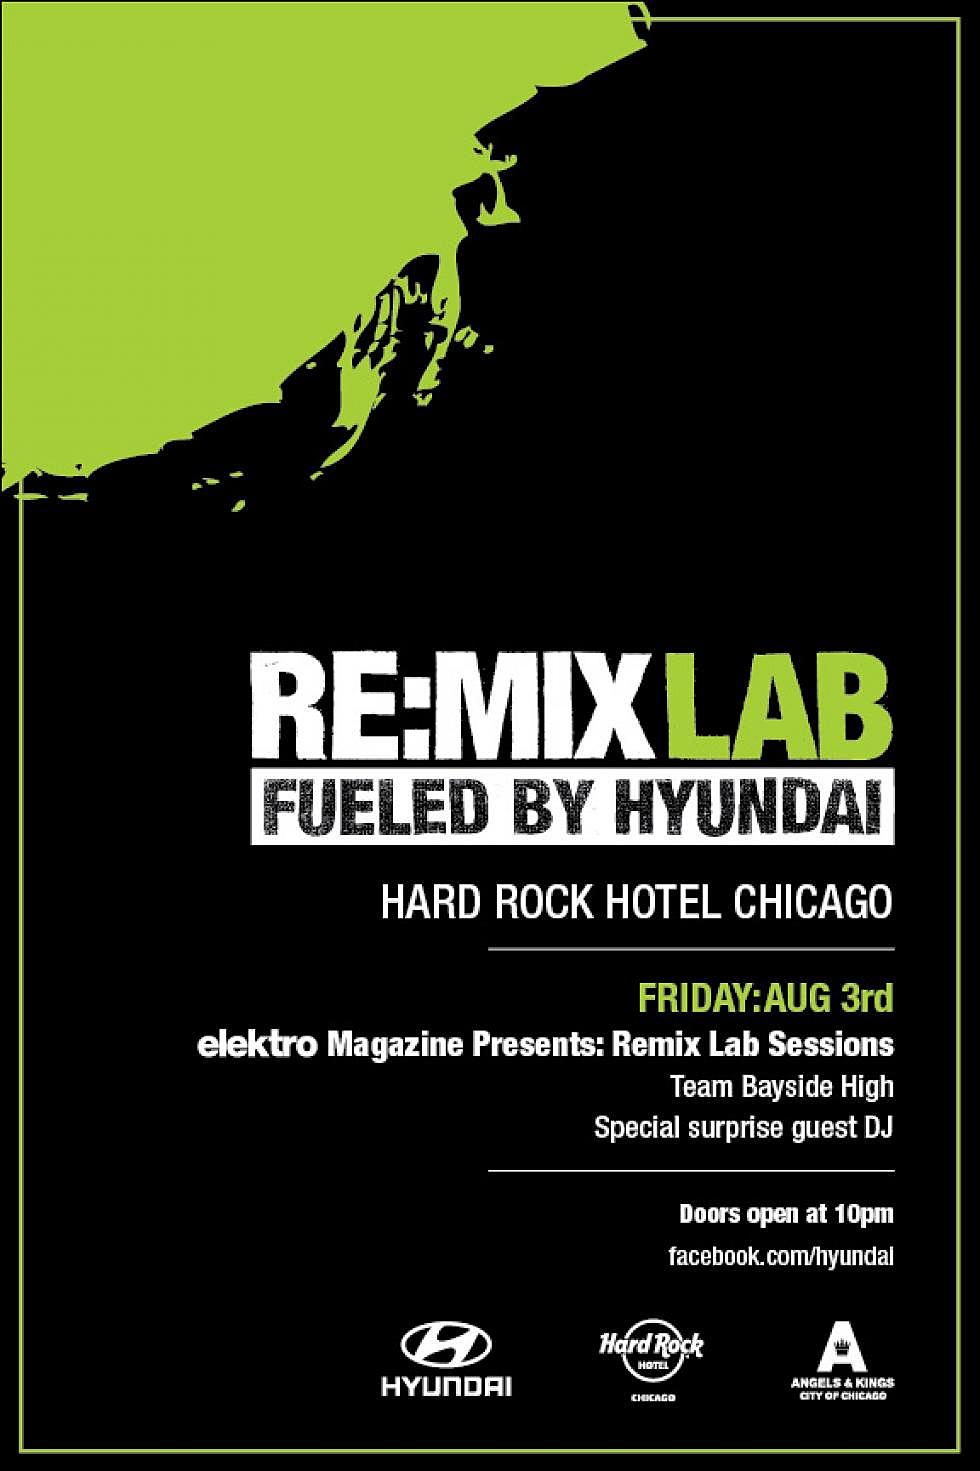 elektro Magazine Presents: RE:MIX Lab Sessions at the Hard Rock Hotel August 3rd